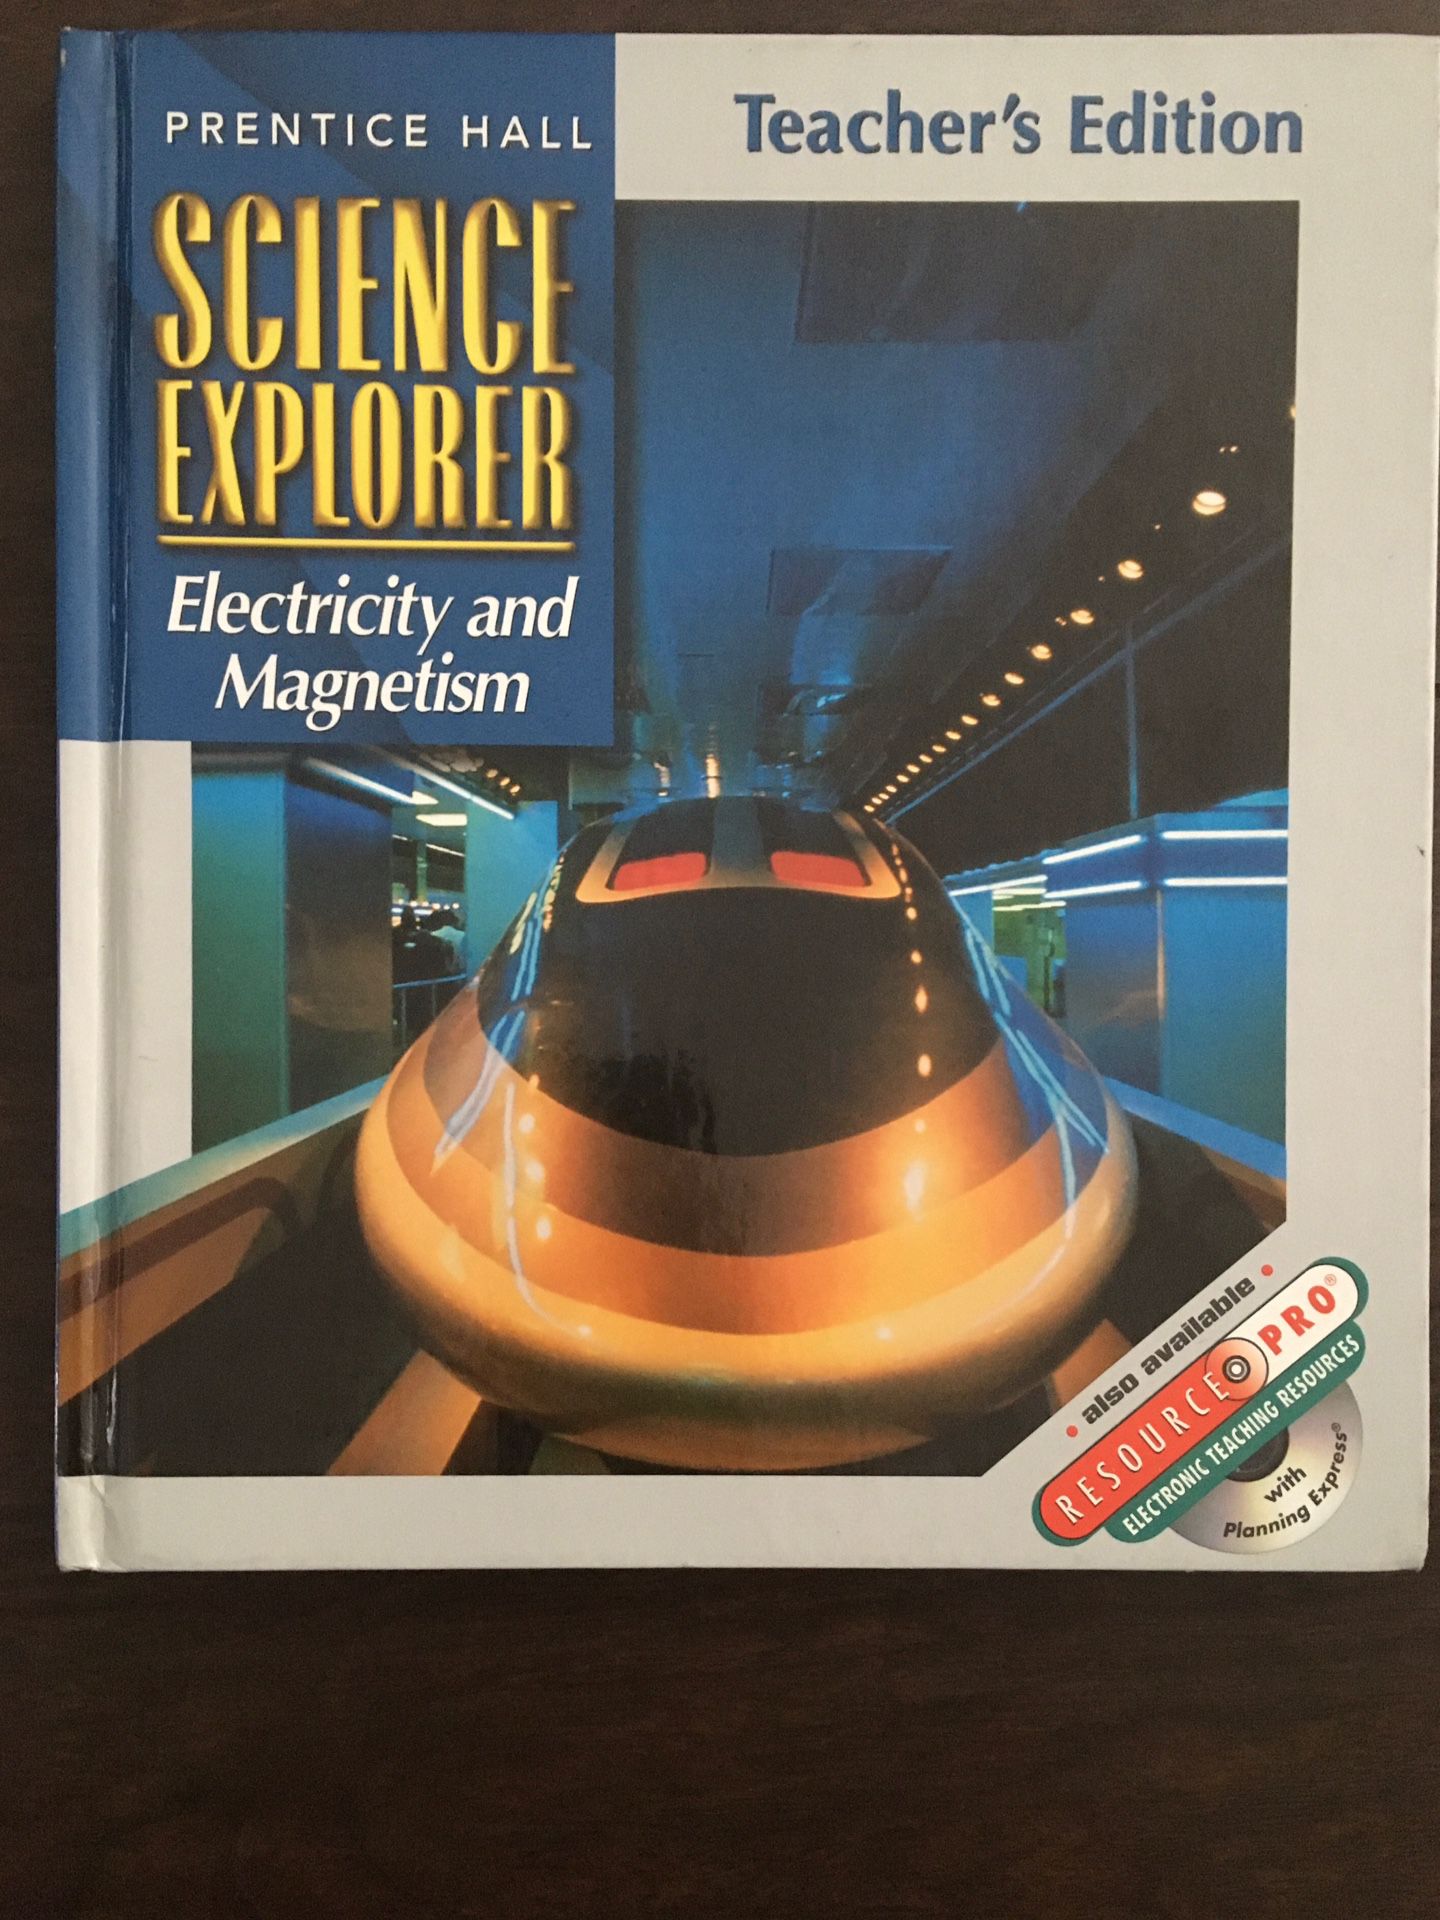 Science　Edition　Teacher's　Buena　Explorer　and　Electricity　Magnetism　CA　for　Sale　Park,　in　OfferUp